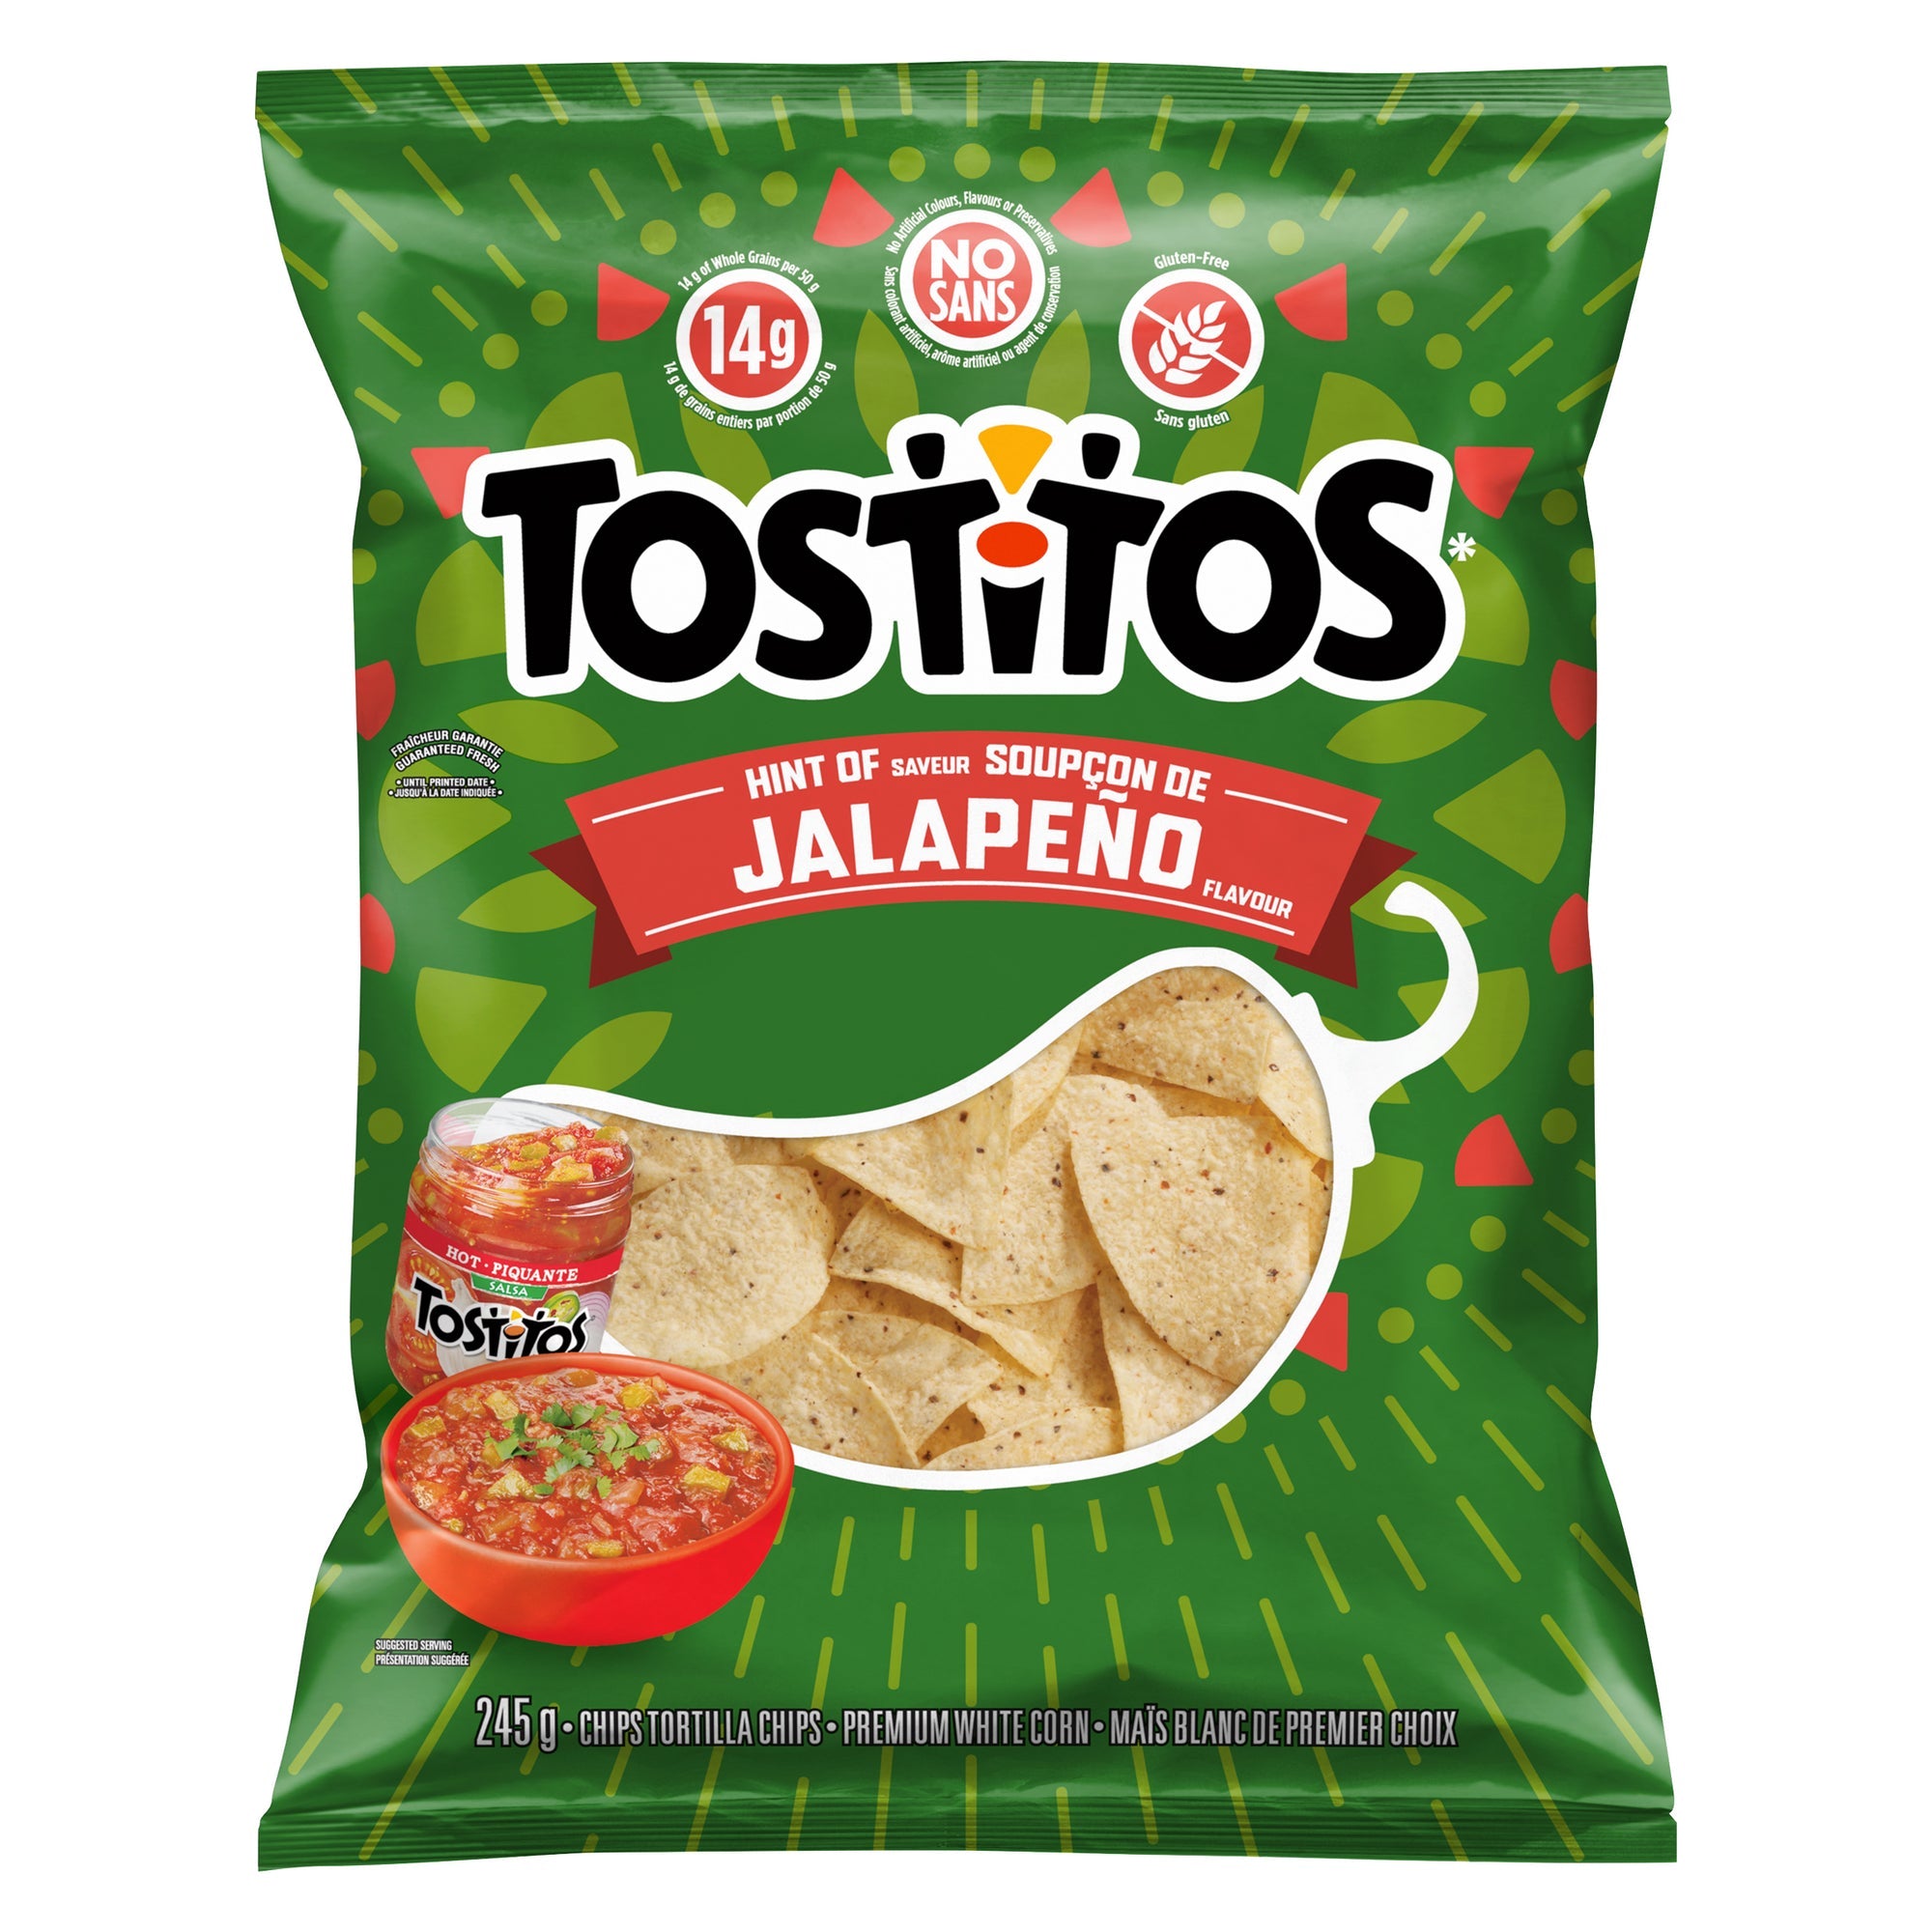 Tostitos Hint Of Jalapeno Tortilla Chips, front of bag